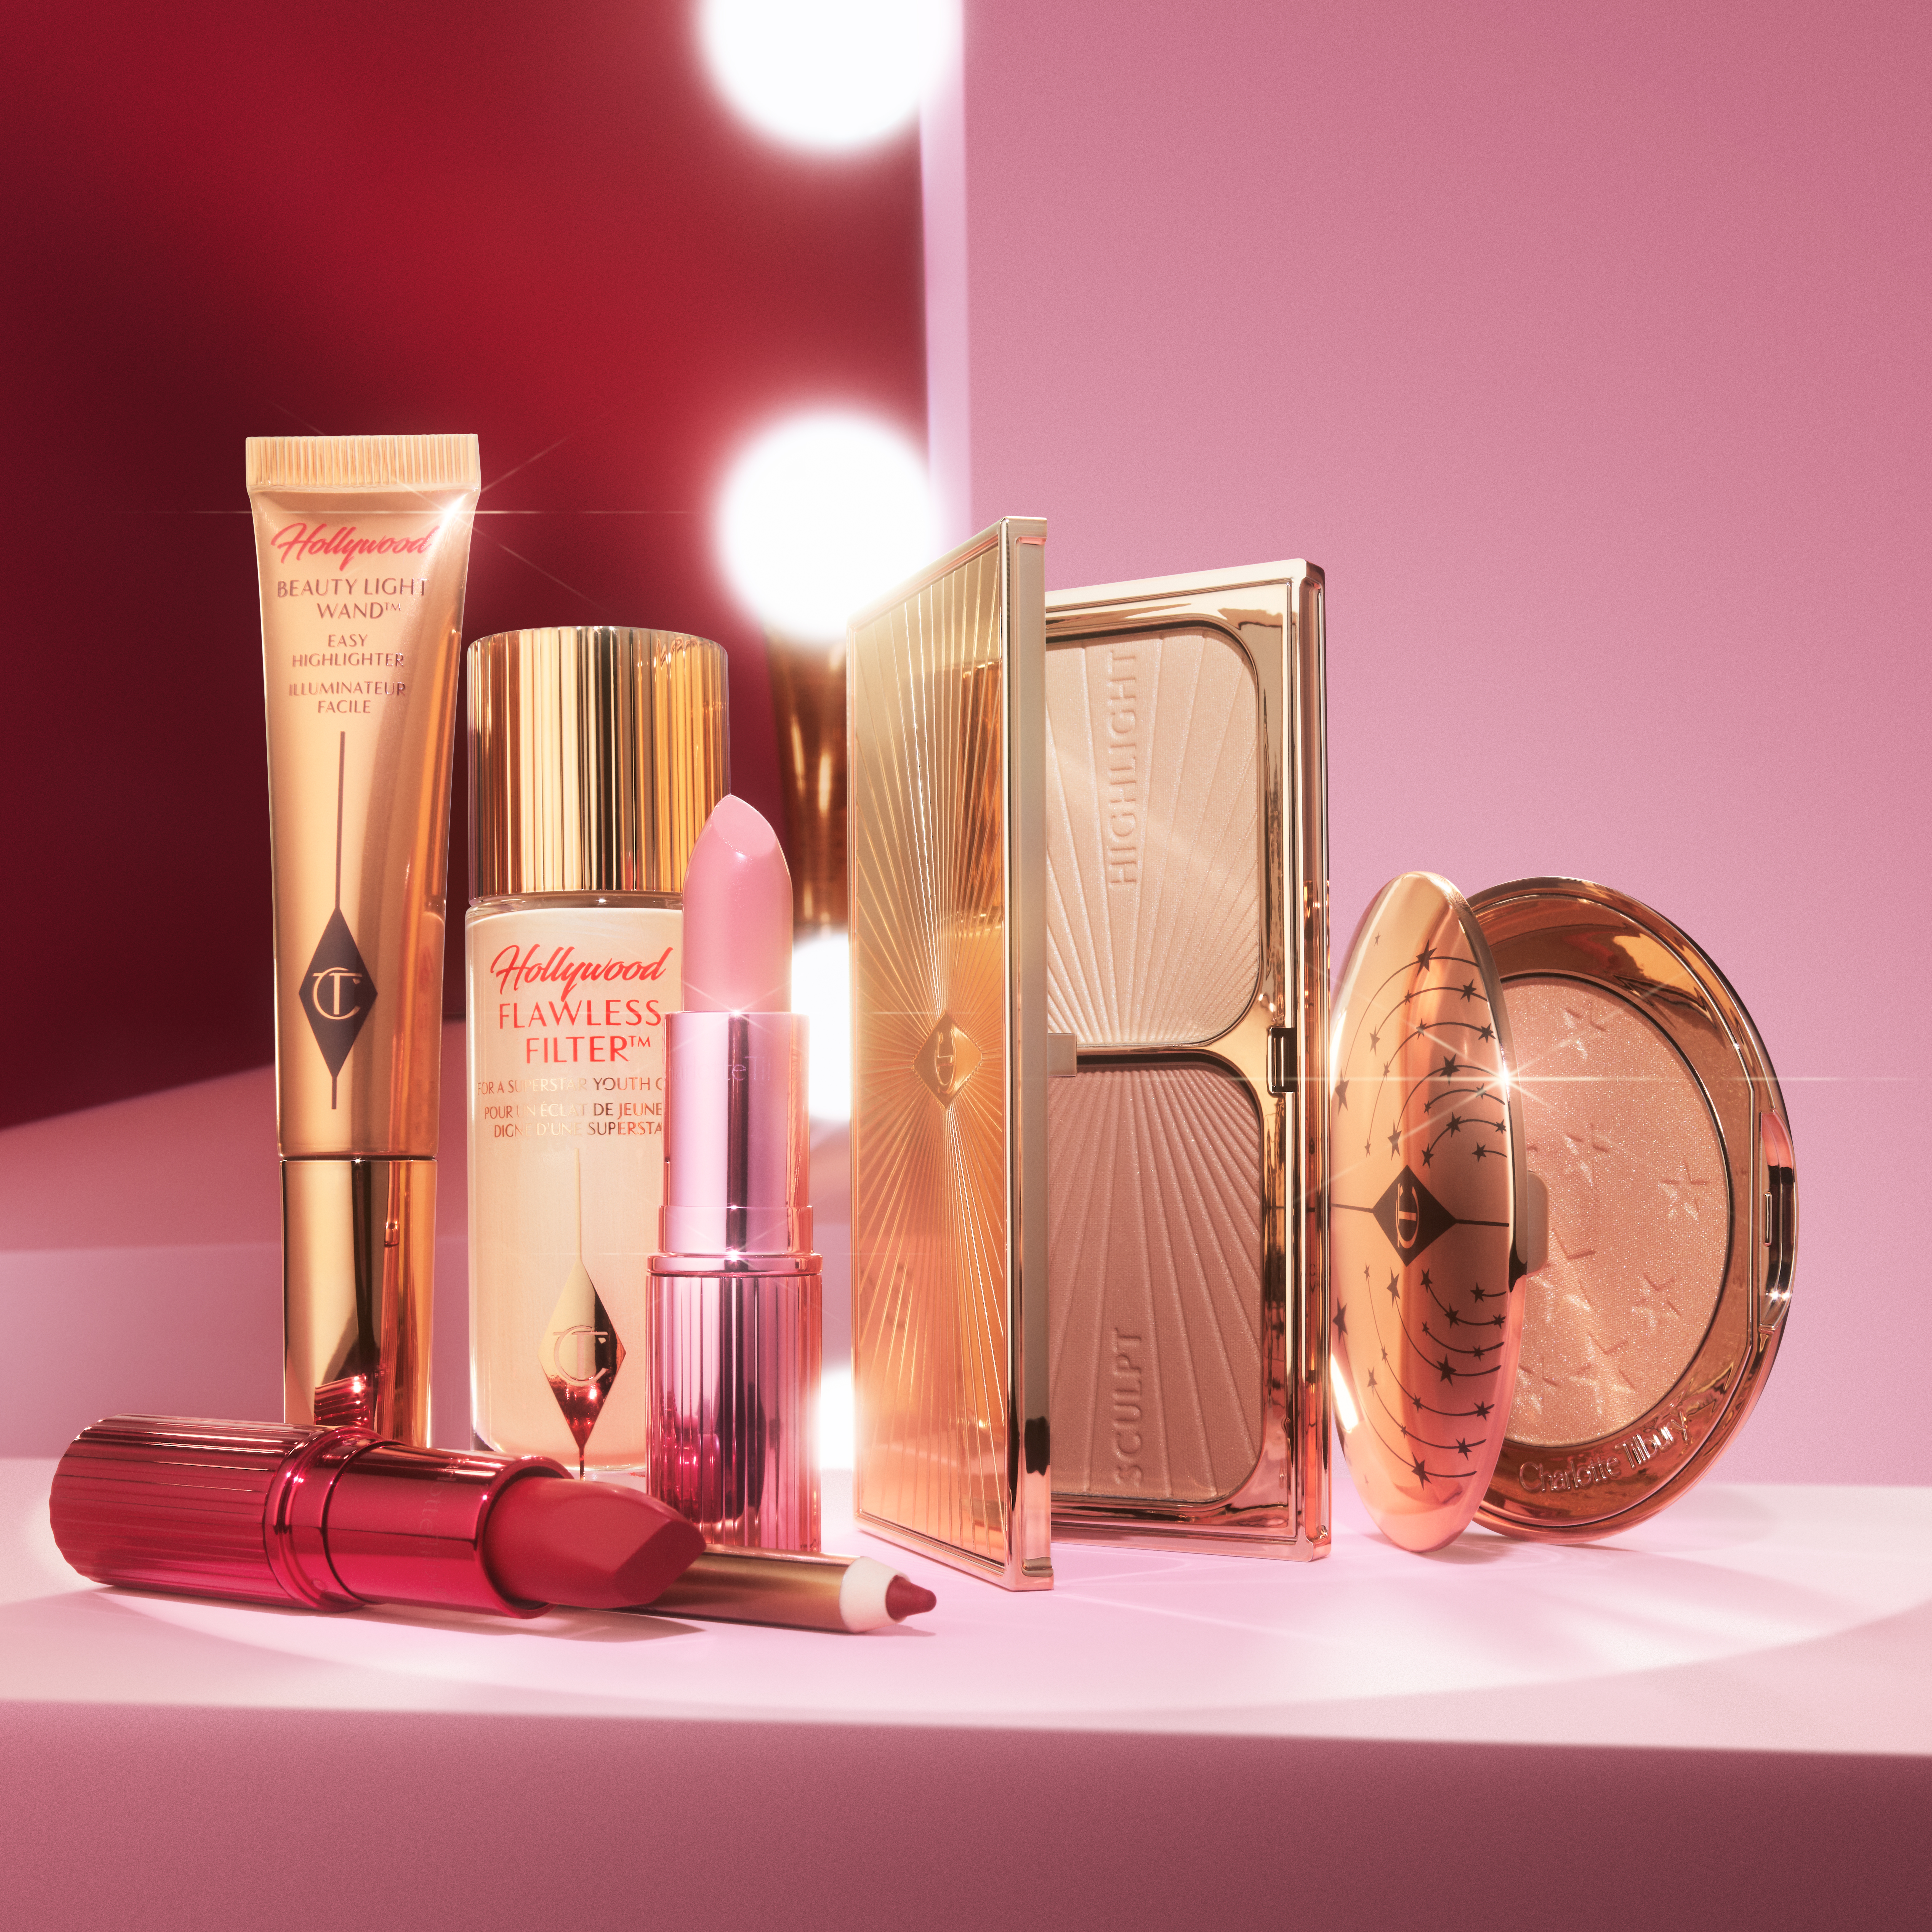 Valentine's Day beauty gifts from Charlotte Tilbury's Hollywood collection